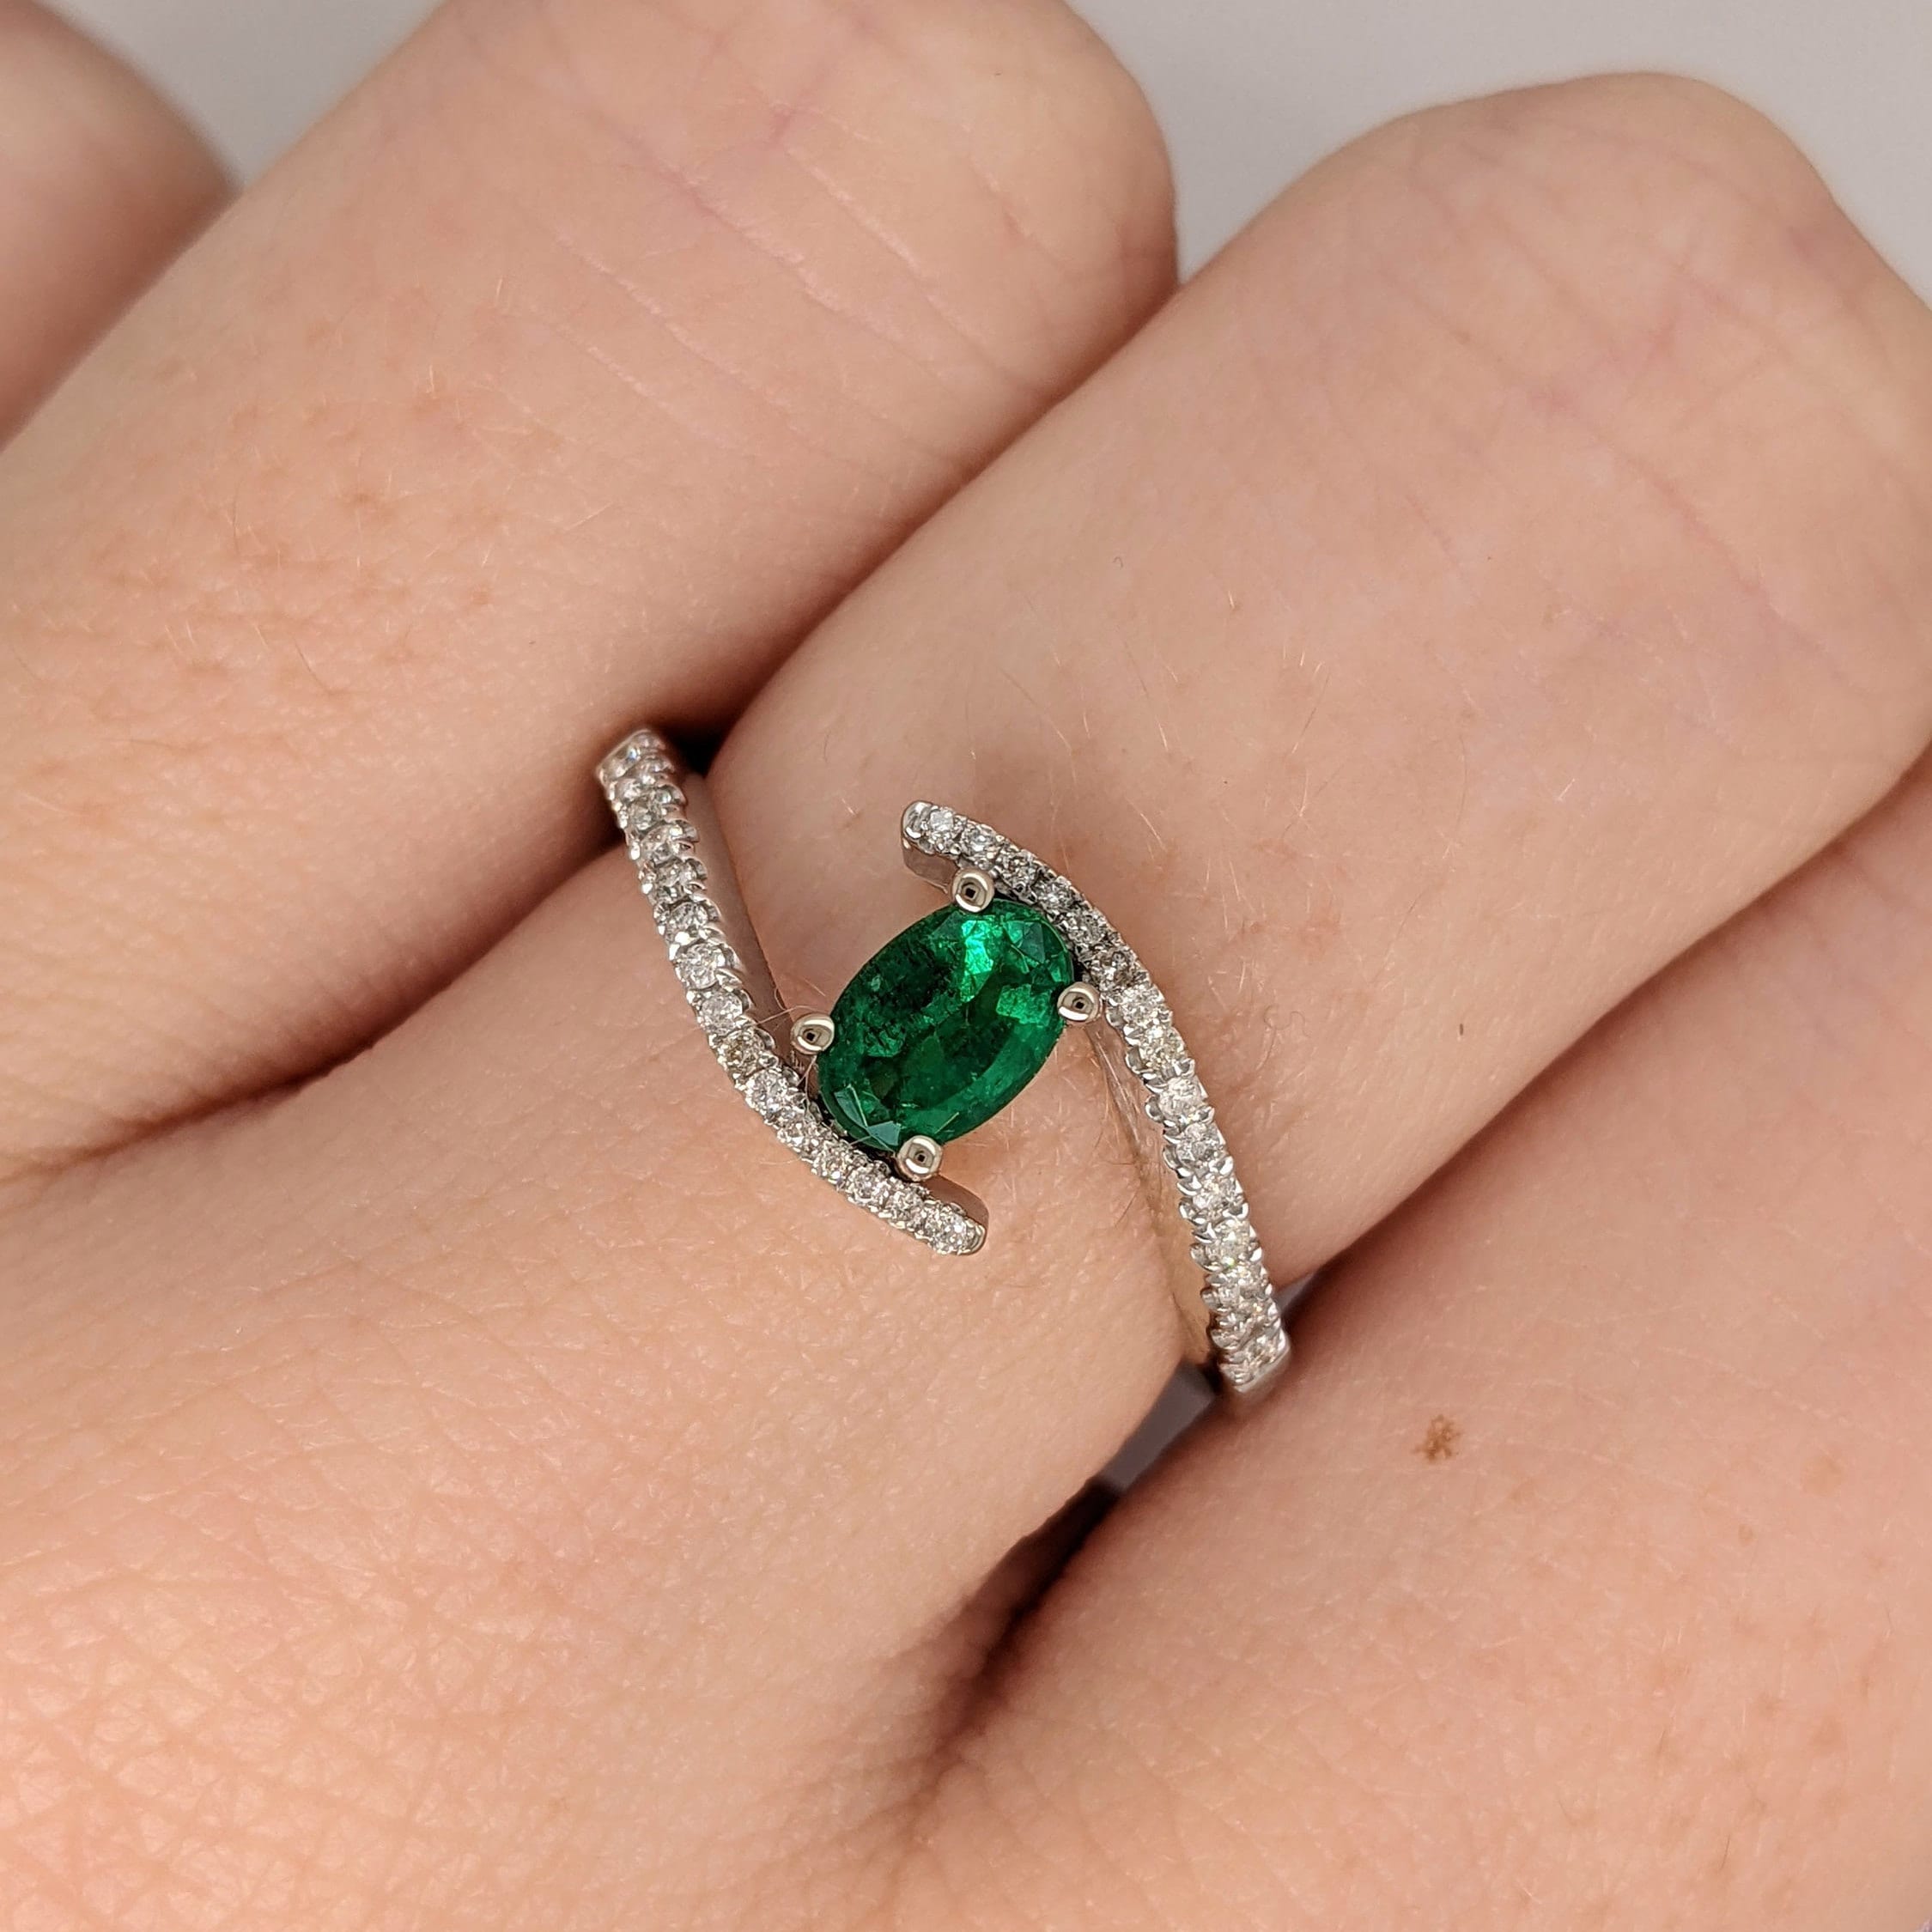 This NNJ Designs Pine Green Emerald Ring in 14k White Gold and pave diamond shank is an elegant piece for any jewelry enthusiast. The oval 6x4mm gemstone is securely set in a bypass style and adorned with a pave diamond shank. Perfect for any occasion, the ring is a beautiful choice for May birthdays, anniversaries, and special occasions like Christmas. Fine Jewelry by Nancy Jain 